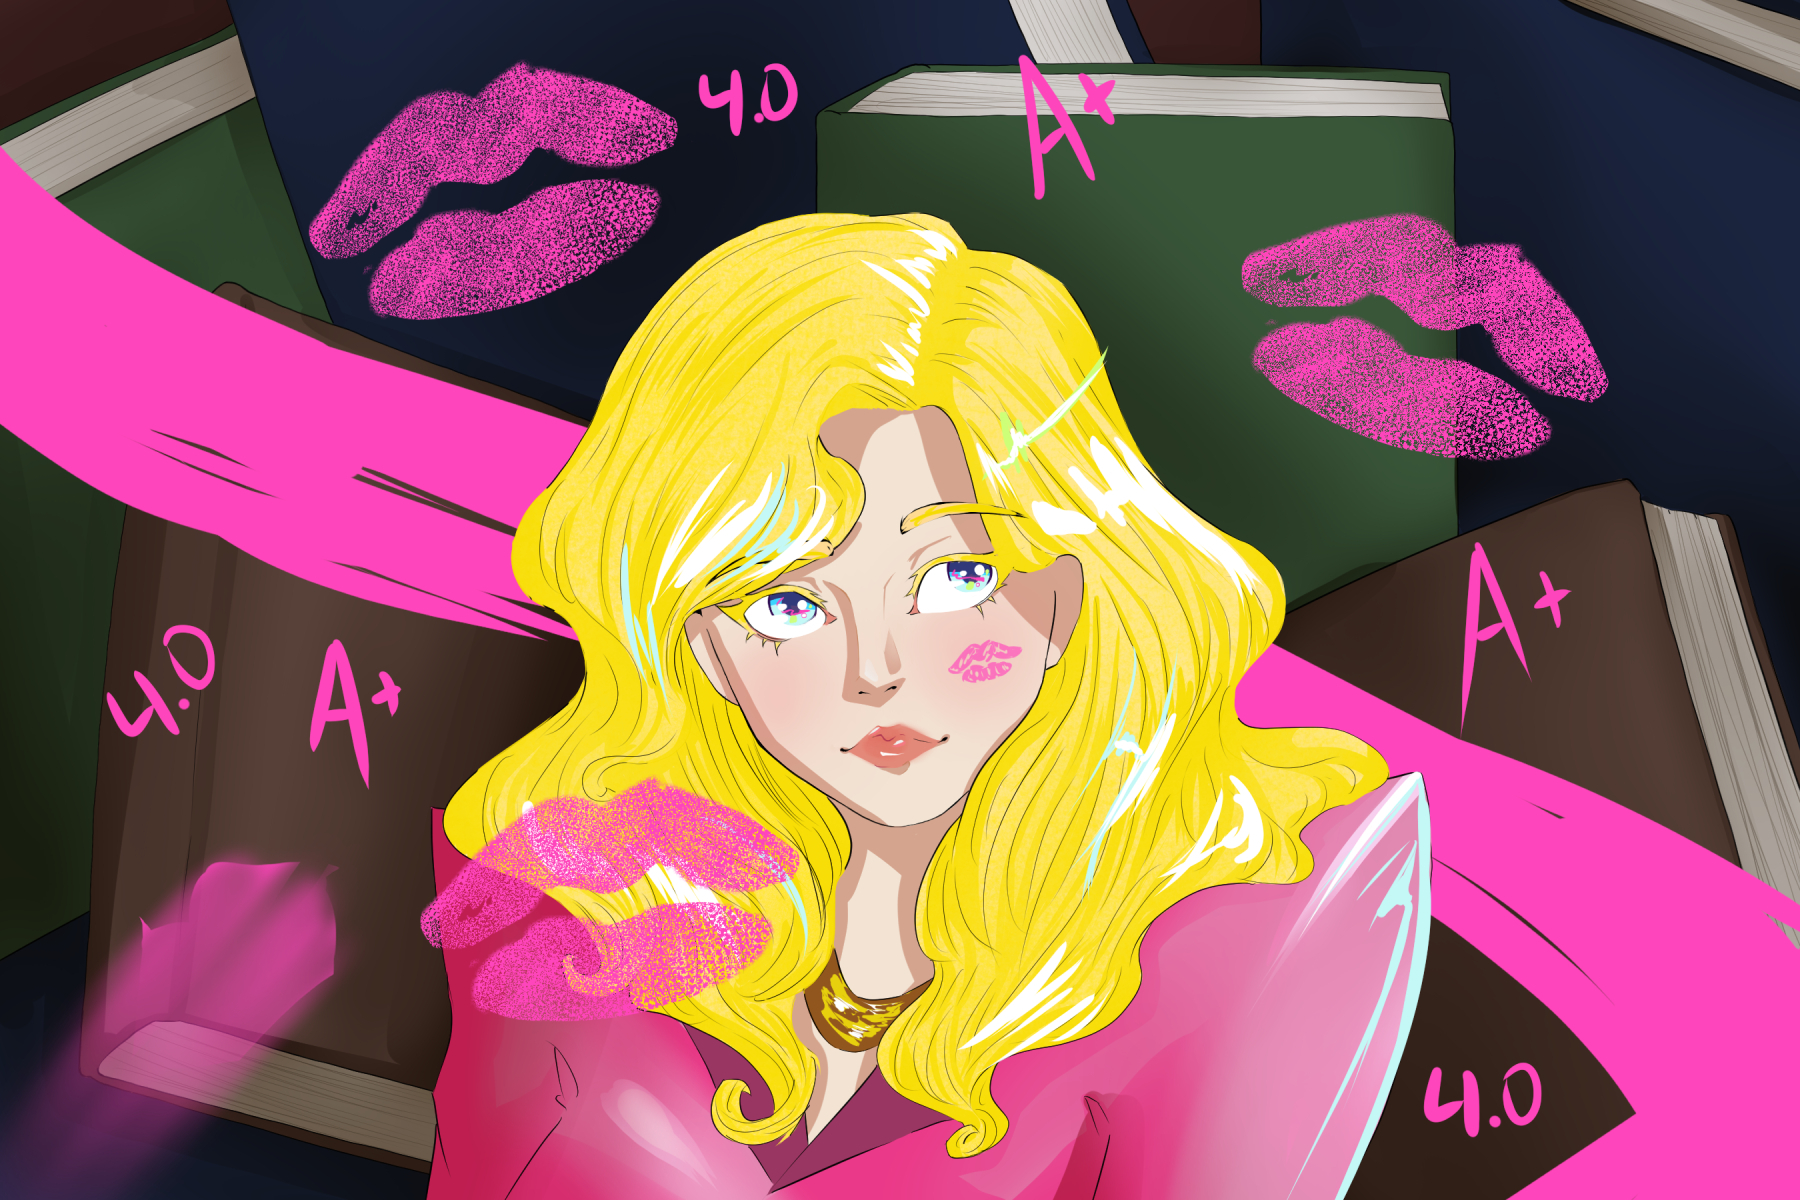 In an article about the bimboification of knowledge, a young blonde woman stands in front of textbooks with lipstick marks all over them.